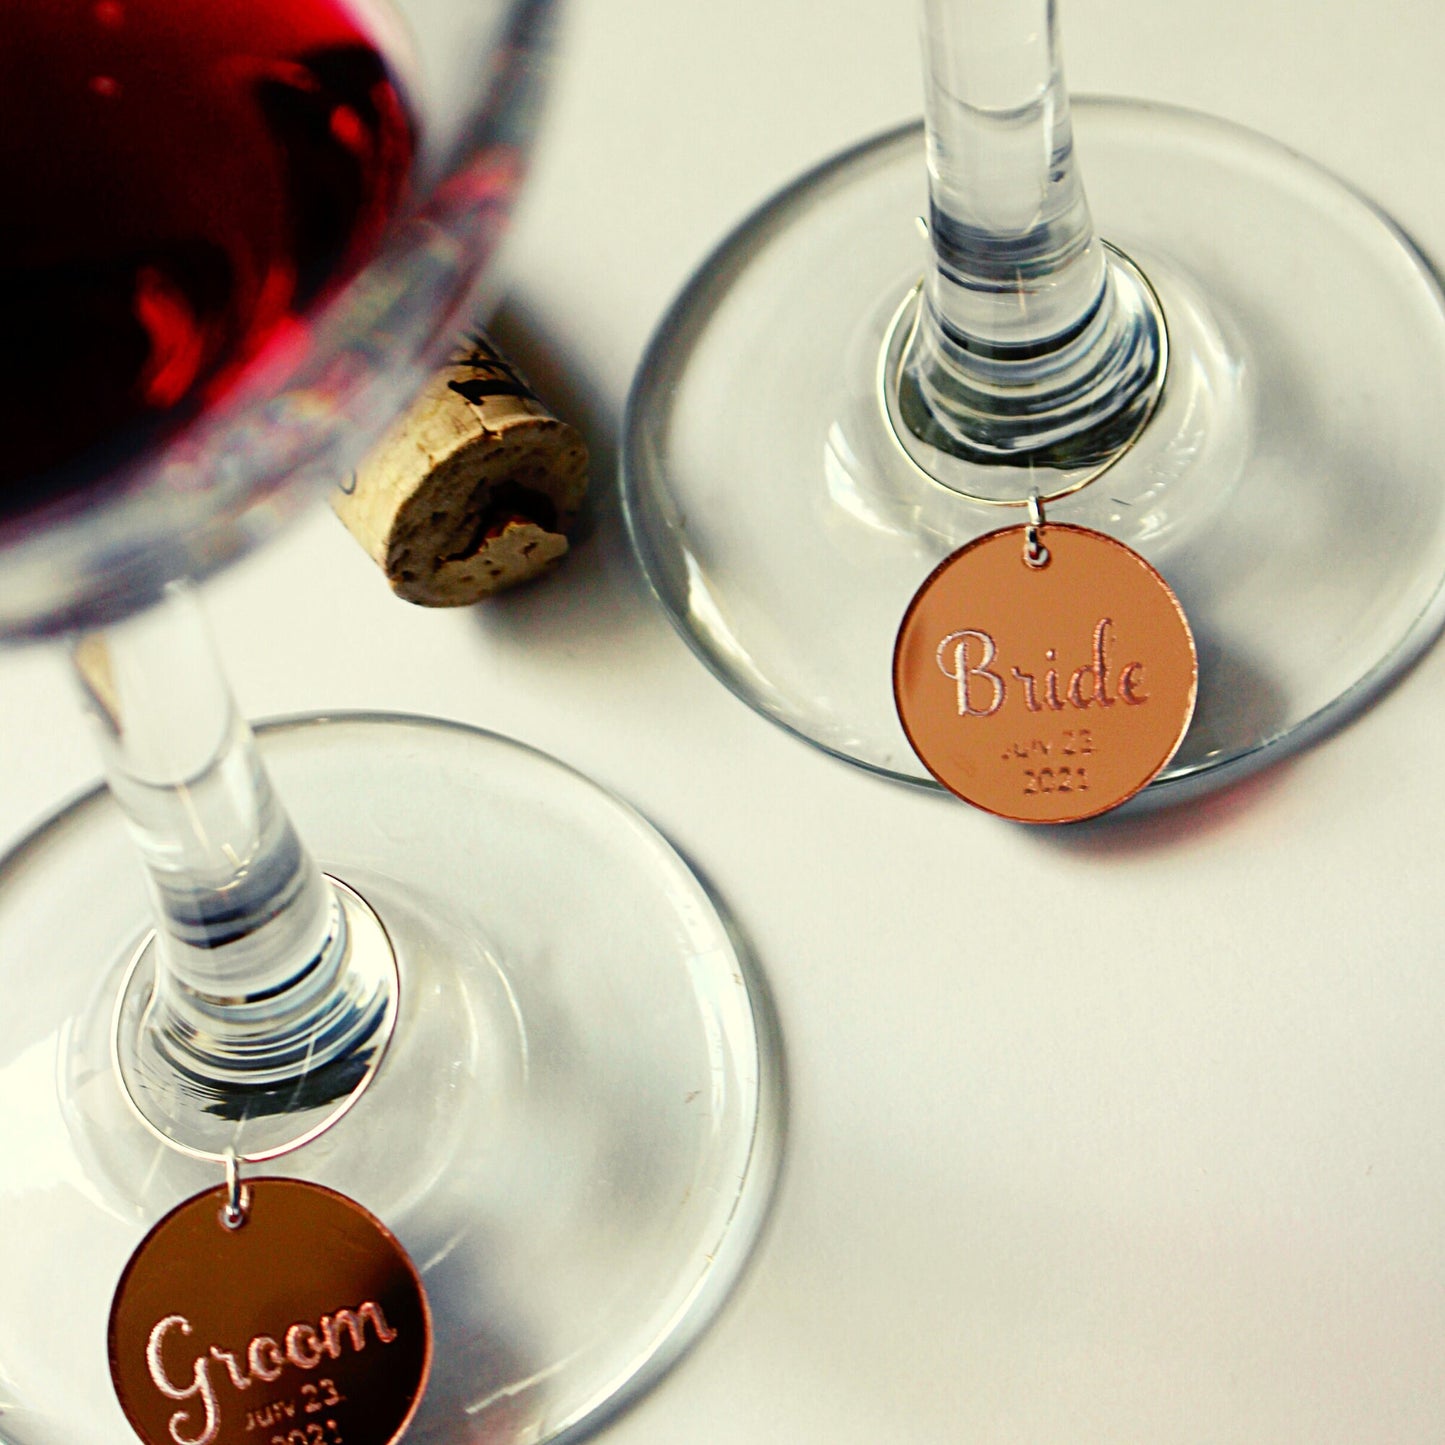 Personalized Wine Charms, Wine Wedding Favors,  Wedding Guest Gift